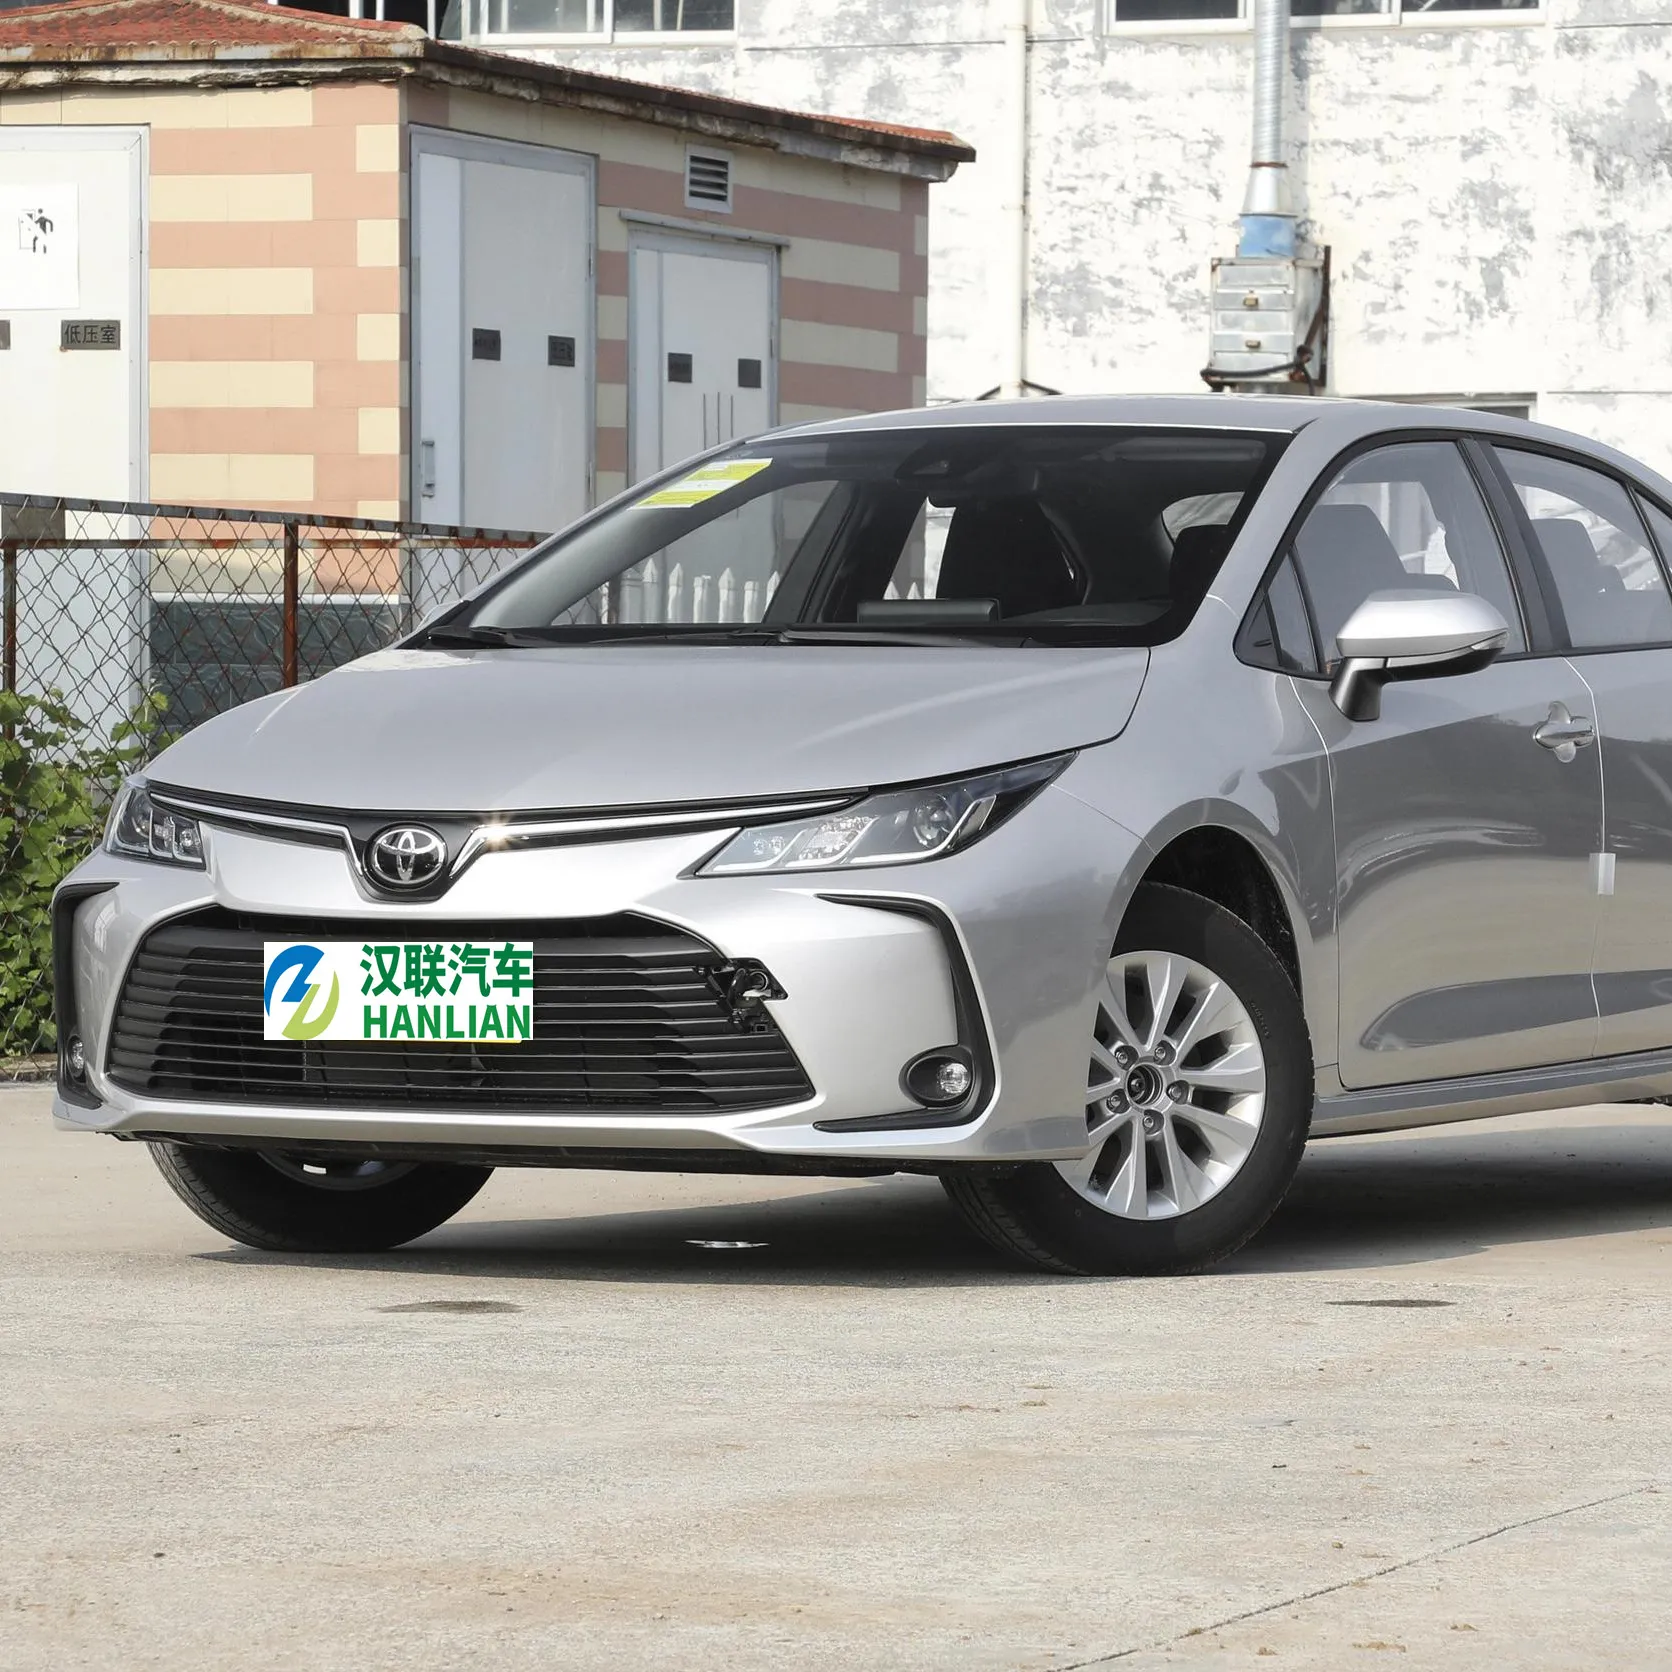 TOYOTA COROLLA HYBRID CARS FOR SALE / USED TOYOTA COROLLA VEHICLES FOR SALE FROM Toyota Corolla Cars